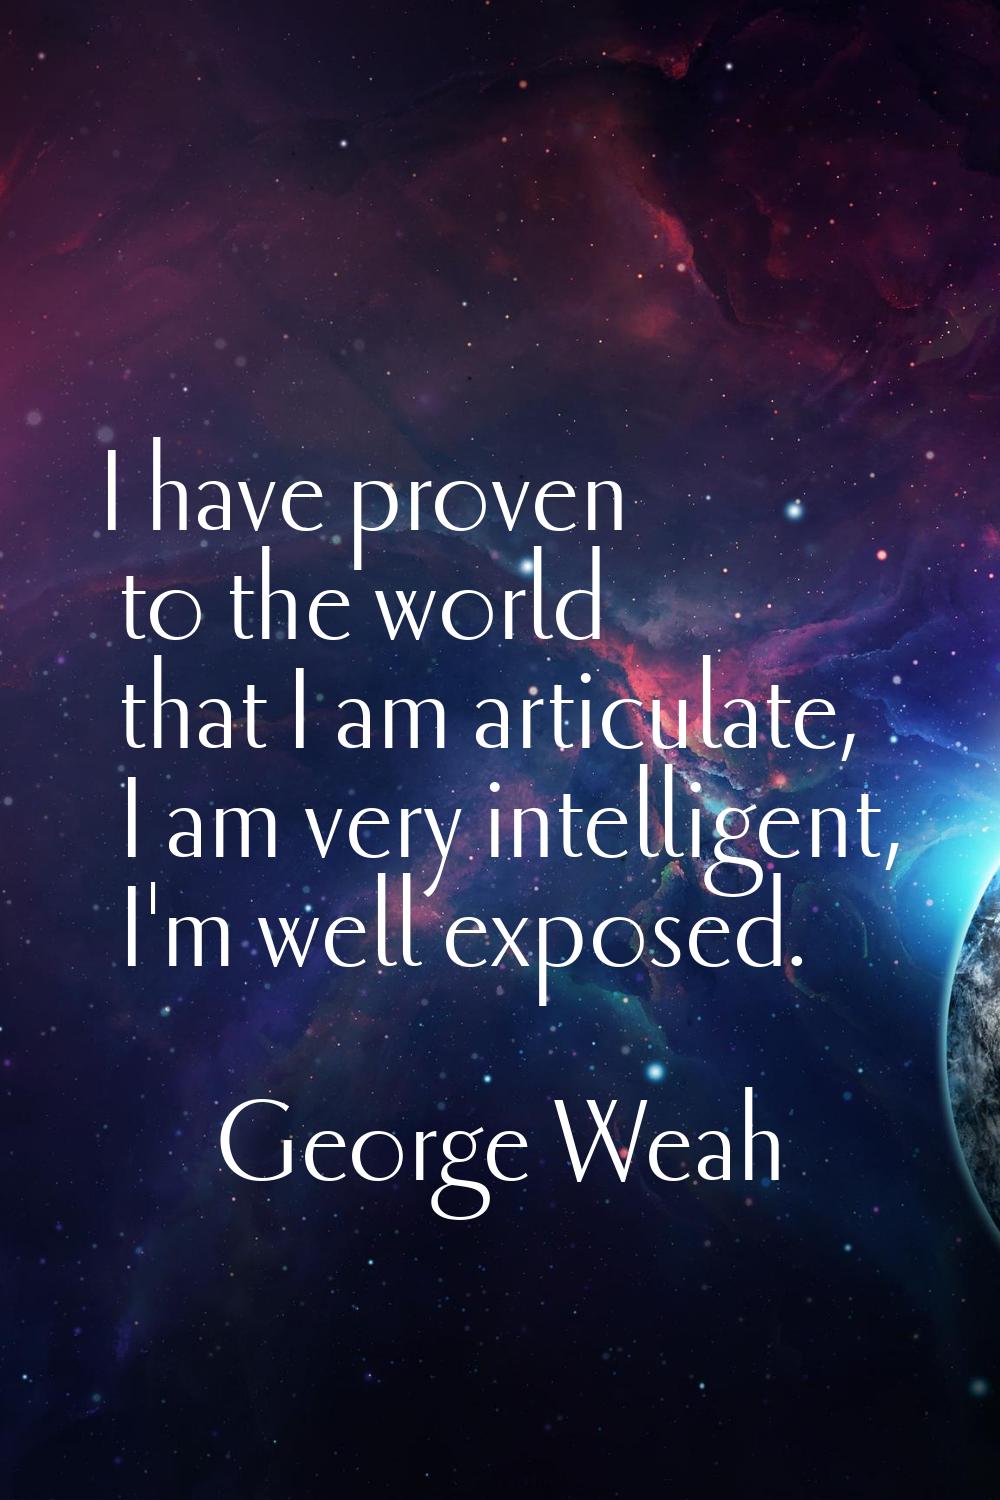 I have proven to the world that I am articulate, I am very intelligent, I'm well exposed.